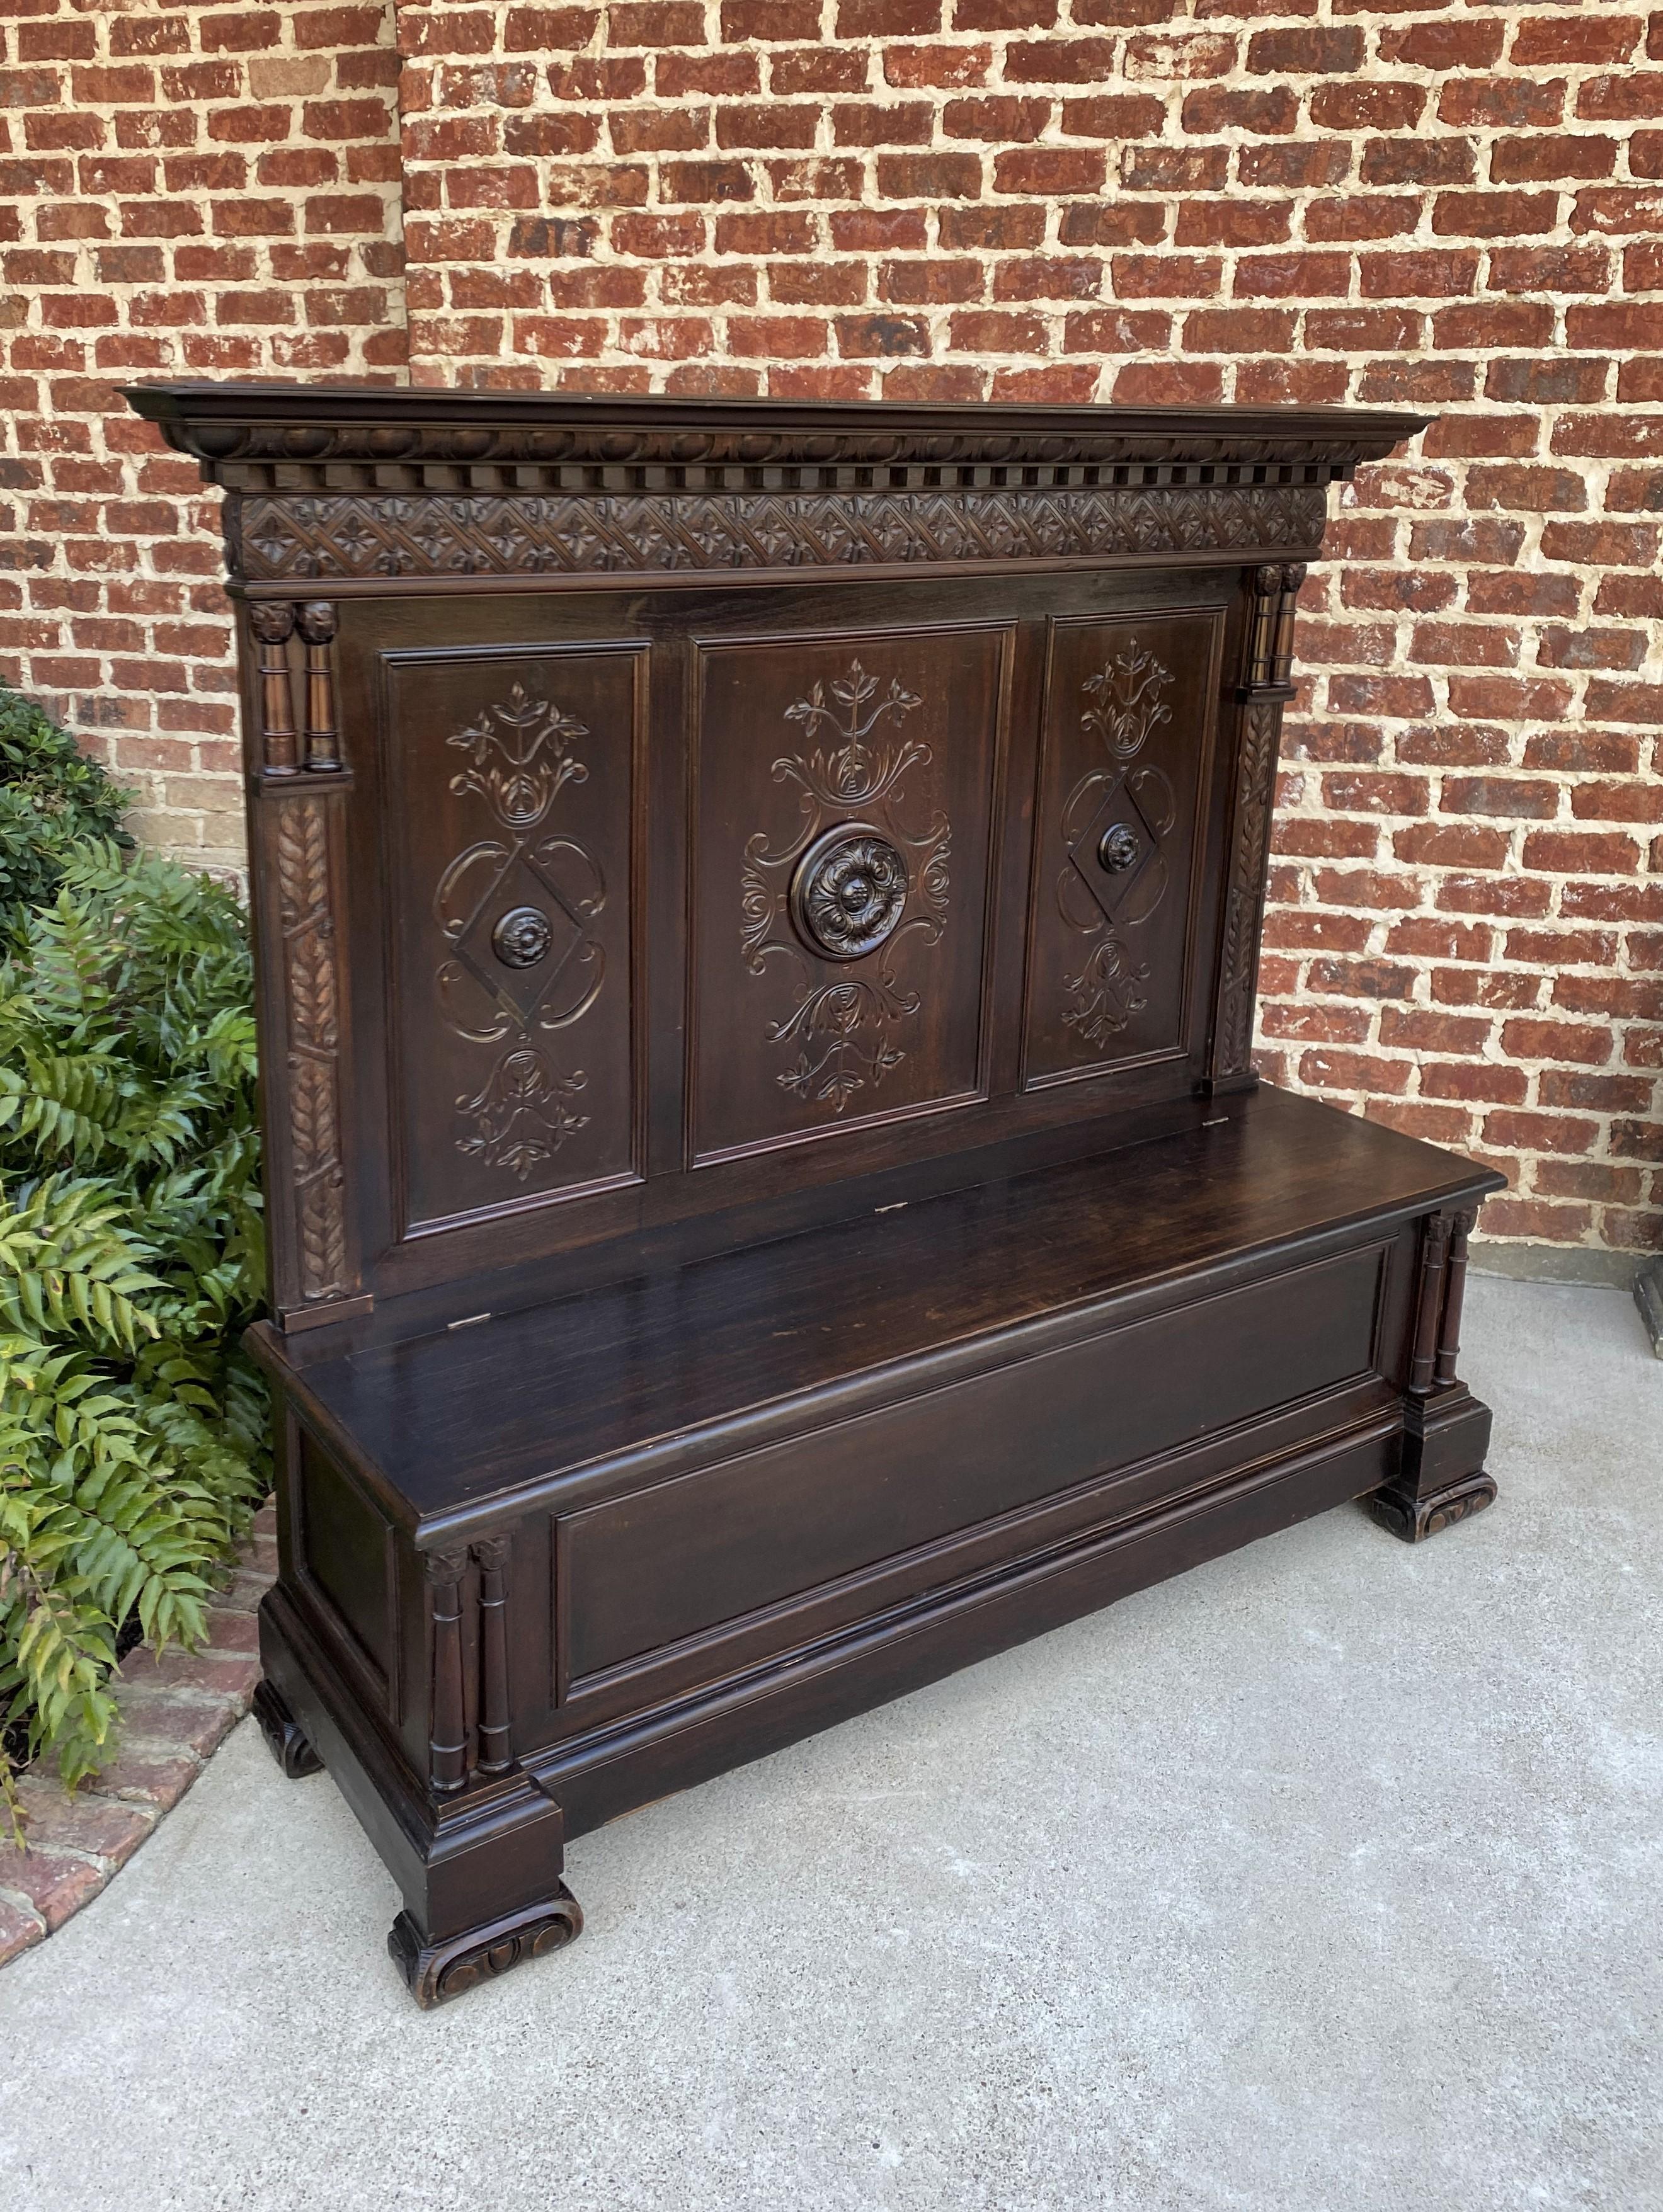 Carved Antique Italian Bench Settee Entry Hall Foyer Renaissance Revival Oak 19th C For Sale